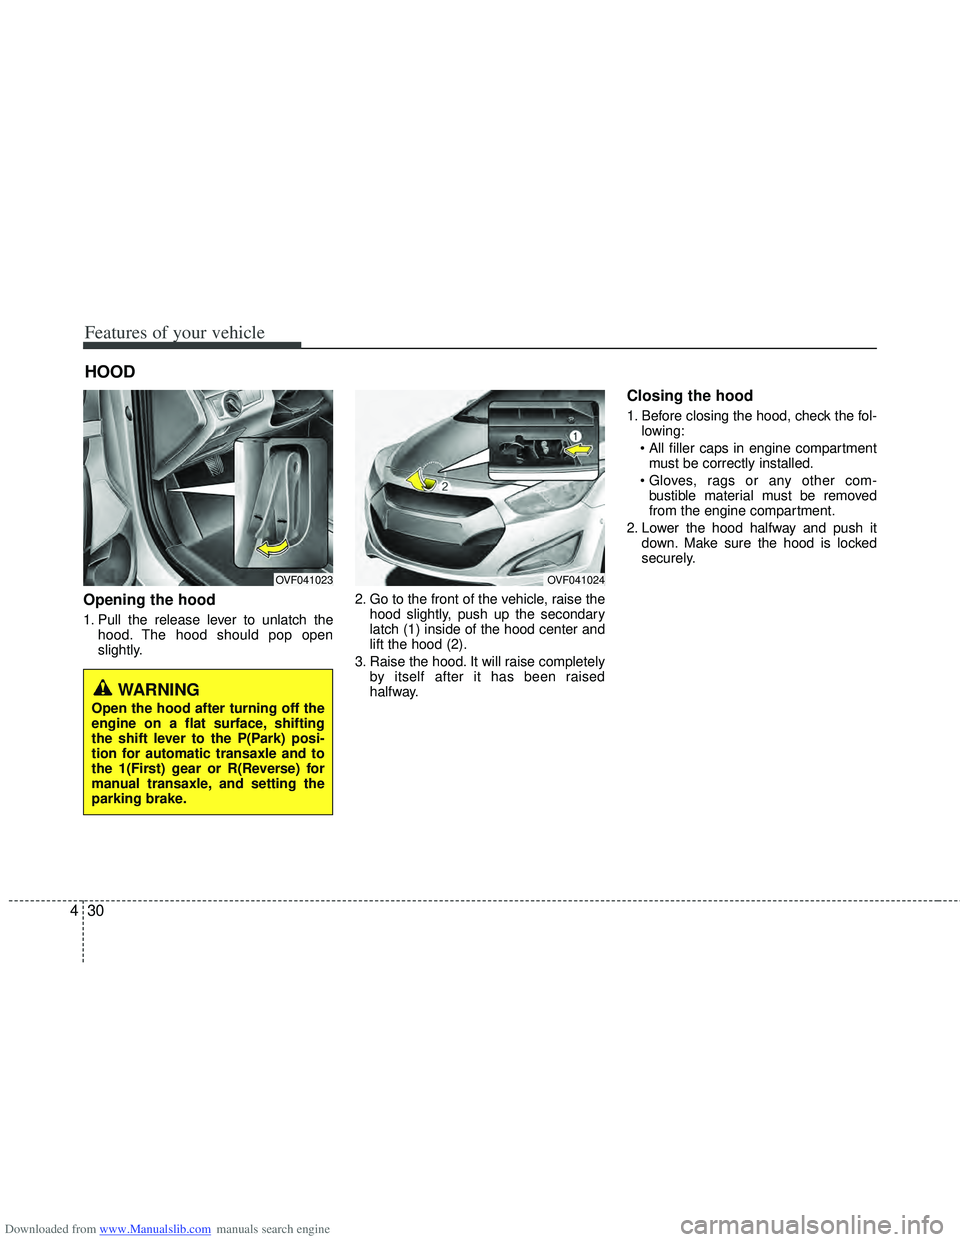 HYUNDAI I40 2018  Owners Manual Downloaded from www.Manualslib.com manuals search engine Features of your vehicle
30
4
Opening the hood 
1. Pull the release lever to unlatch the
hood. The hood should pop open
slightly. 2. Go to the 